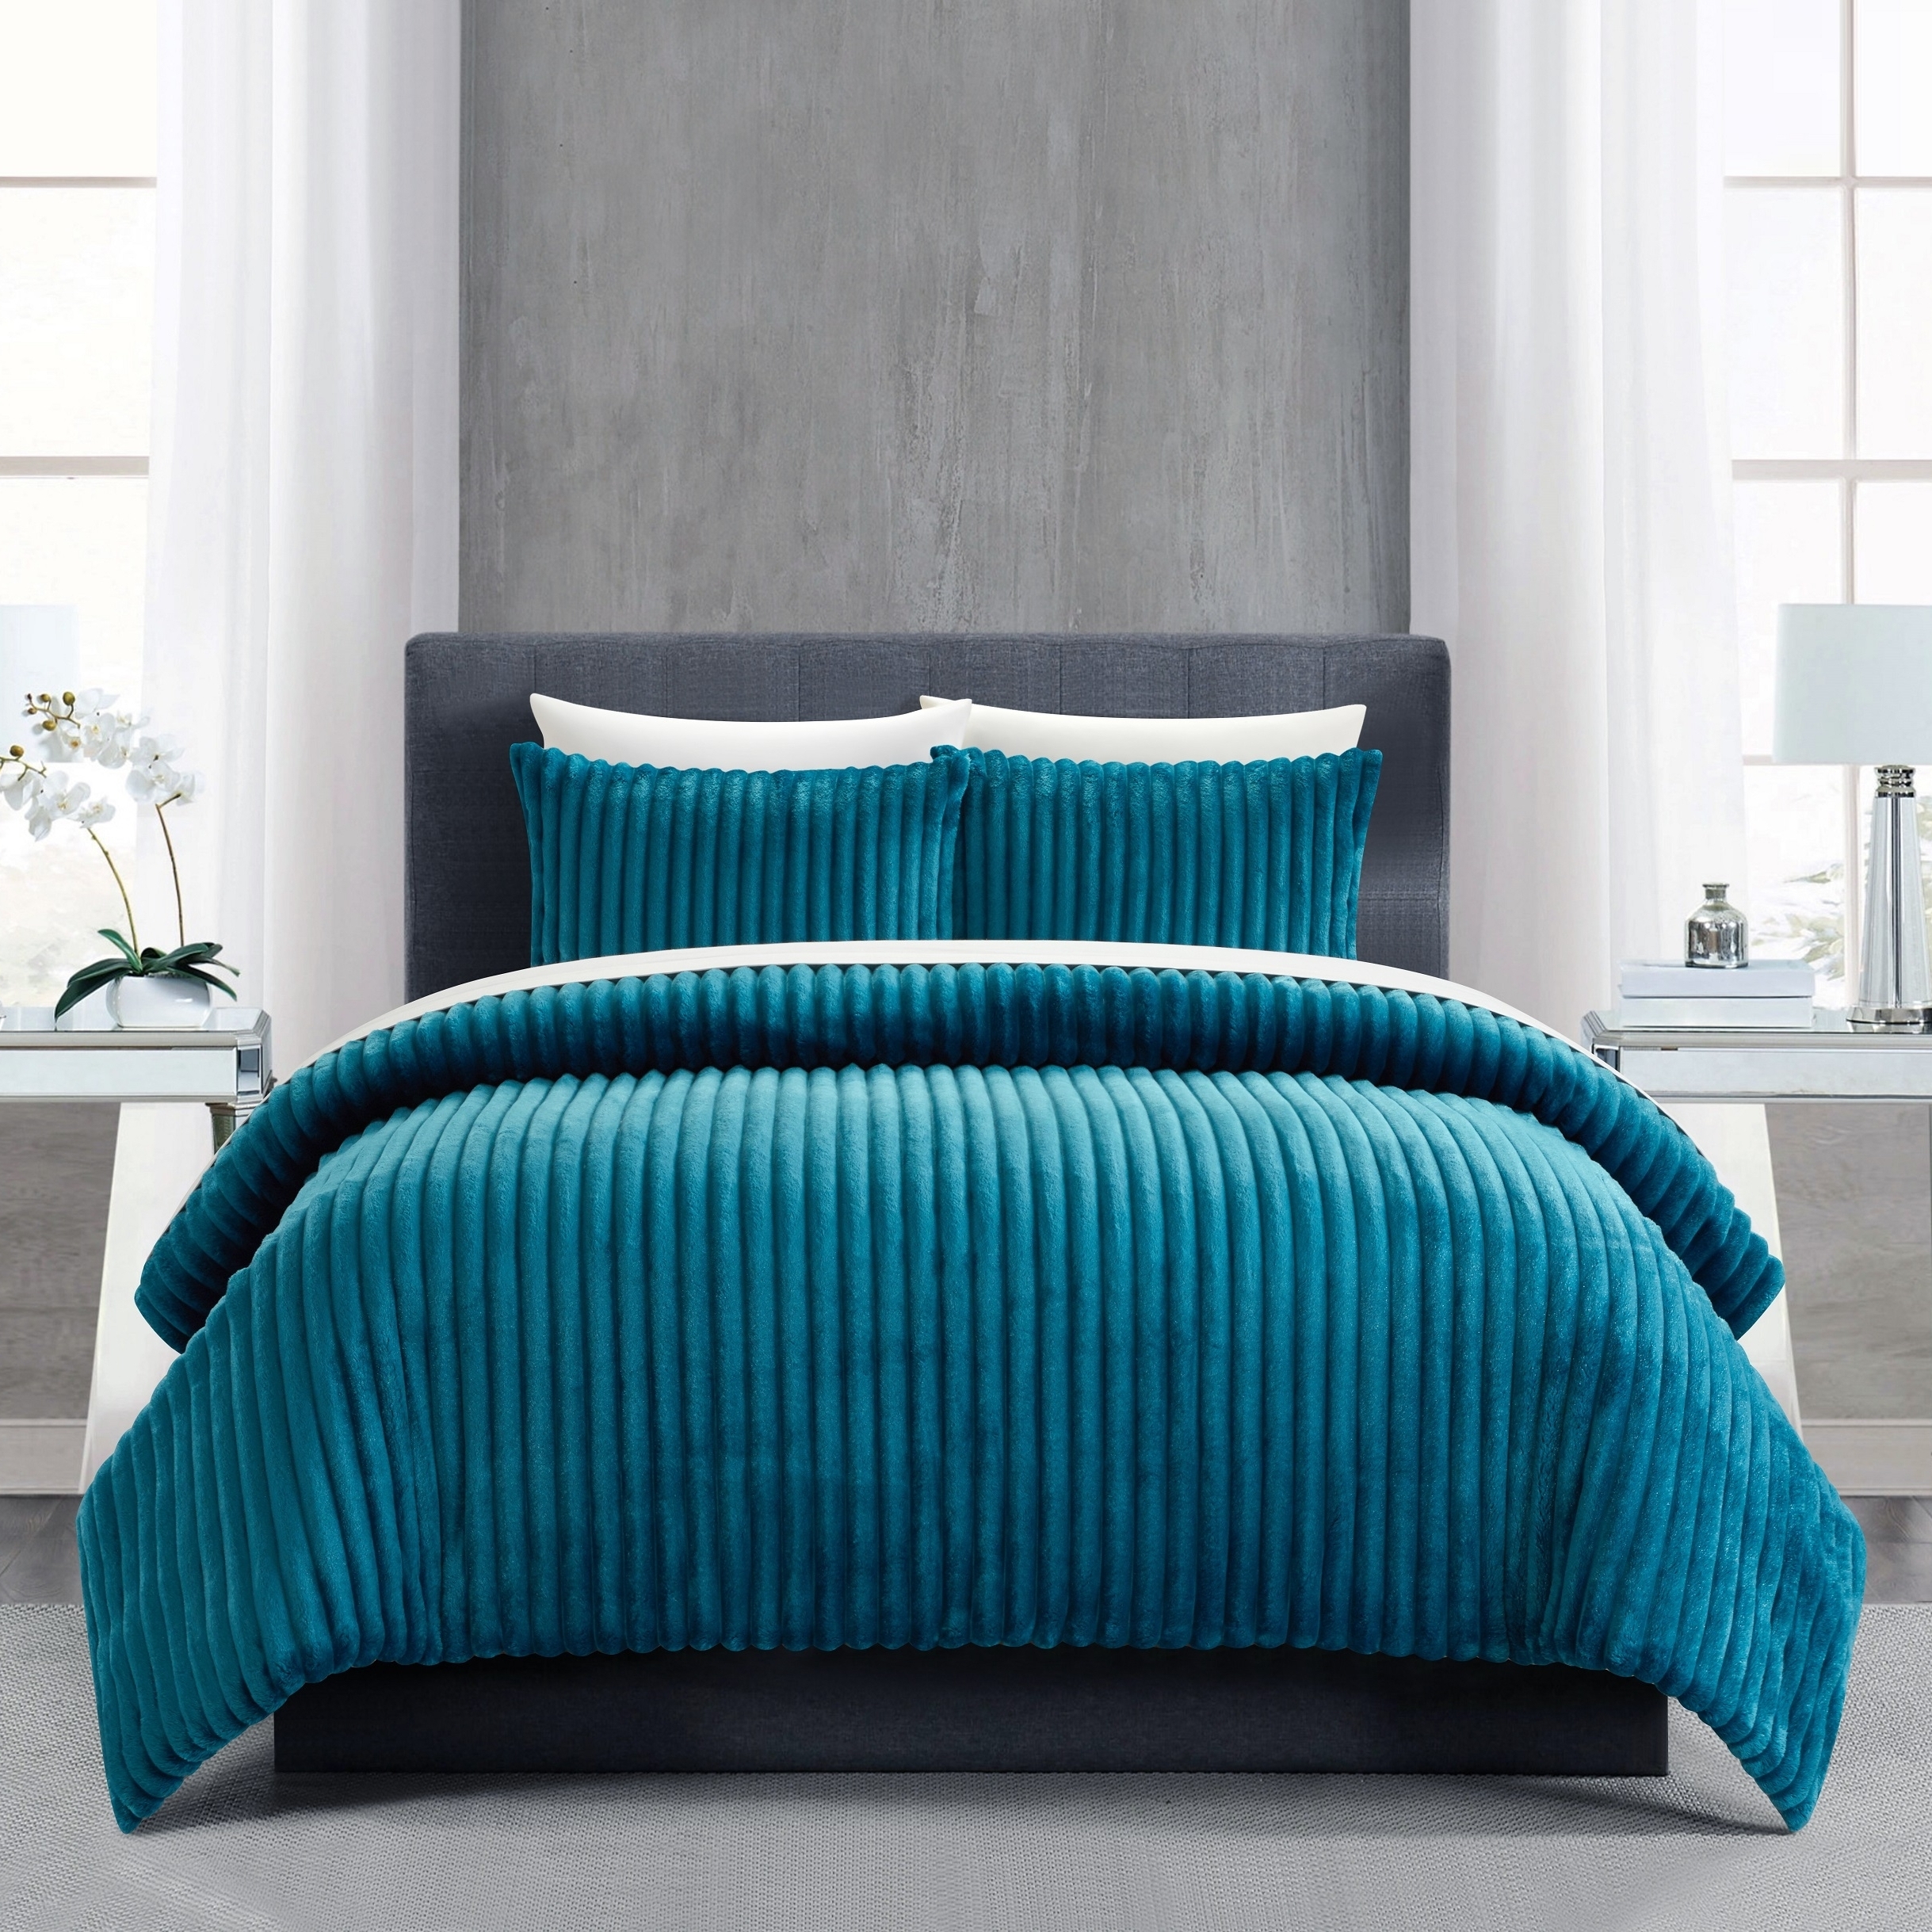 Pabrico 3 Or 2 Piece Comforter Set Microplush Channel Quilted - Teal, Twin - 2 Piece